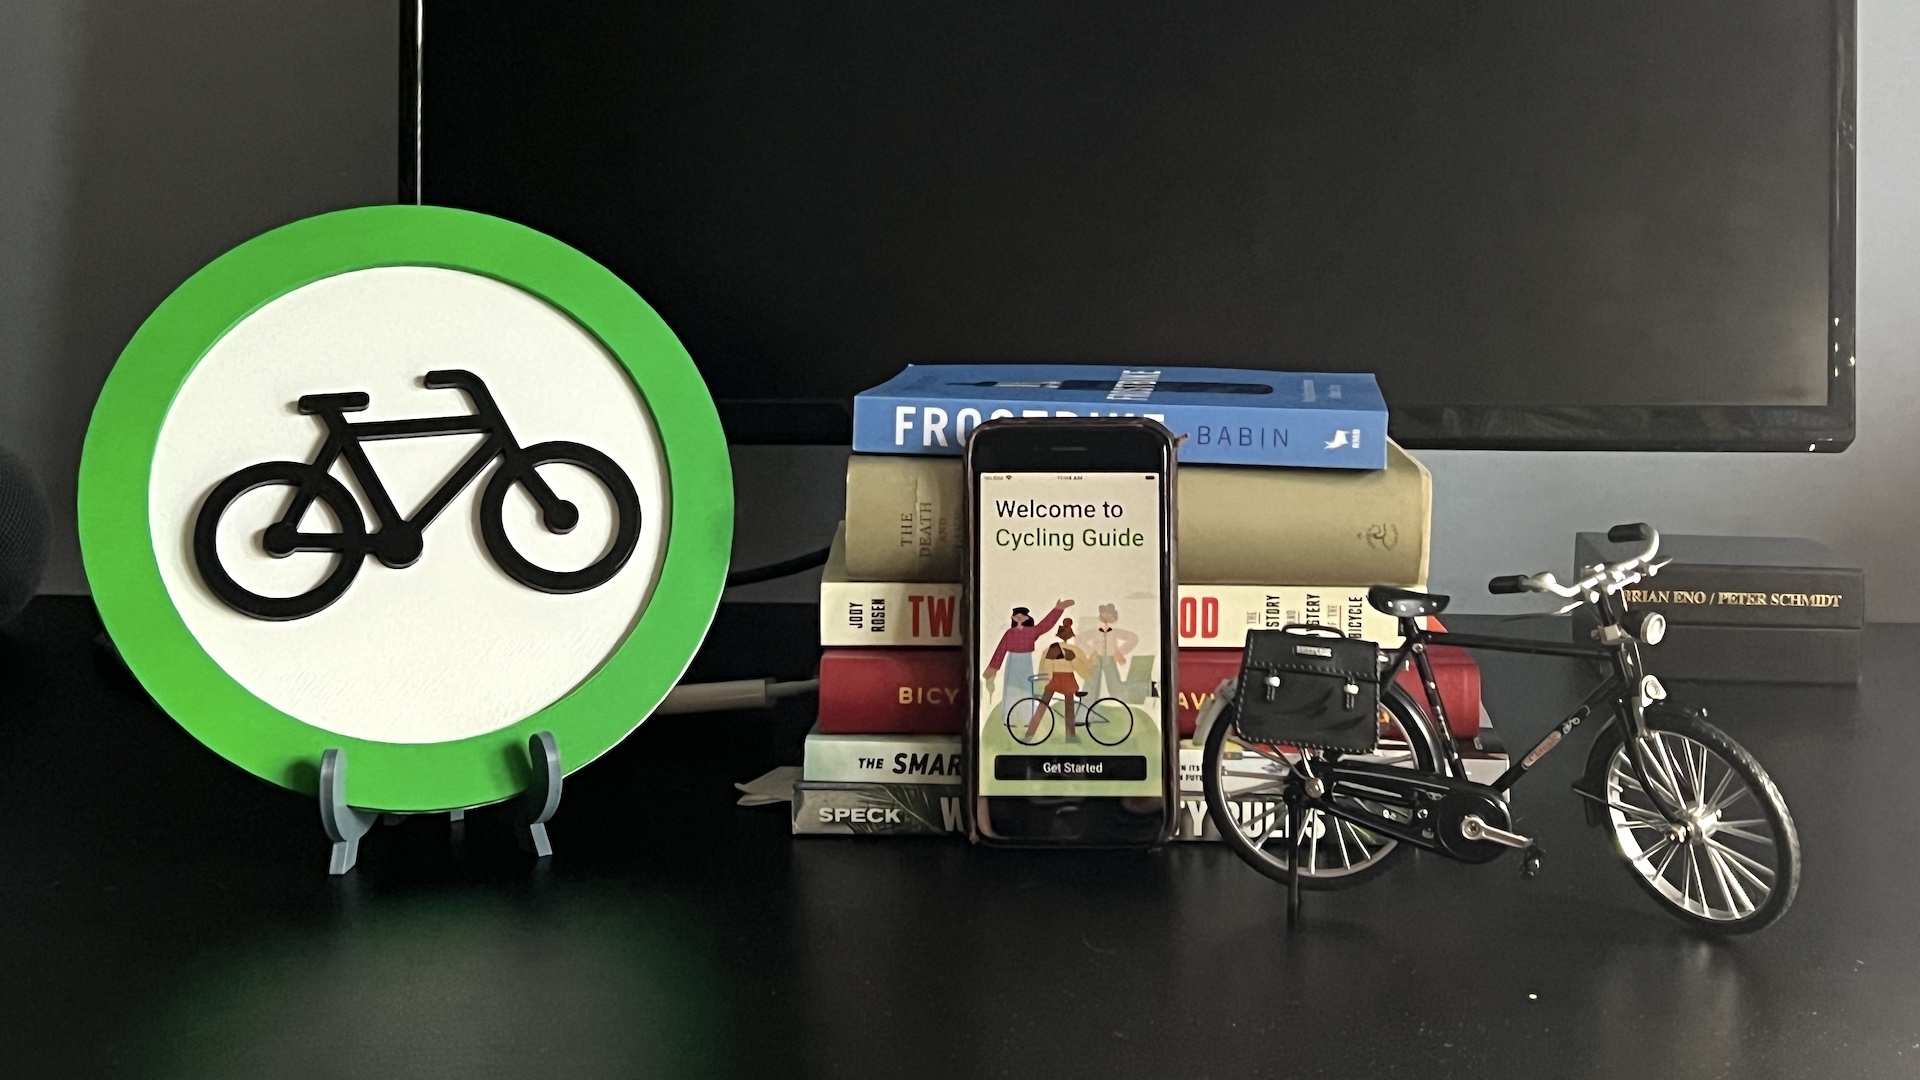 A desktop has some cycling-related artifacts: the Cycling Guide app icon, 6 cycling-related books, a phone with the Cycling Guide initial screen, and a model bicycle.